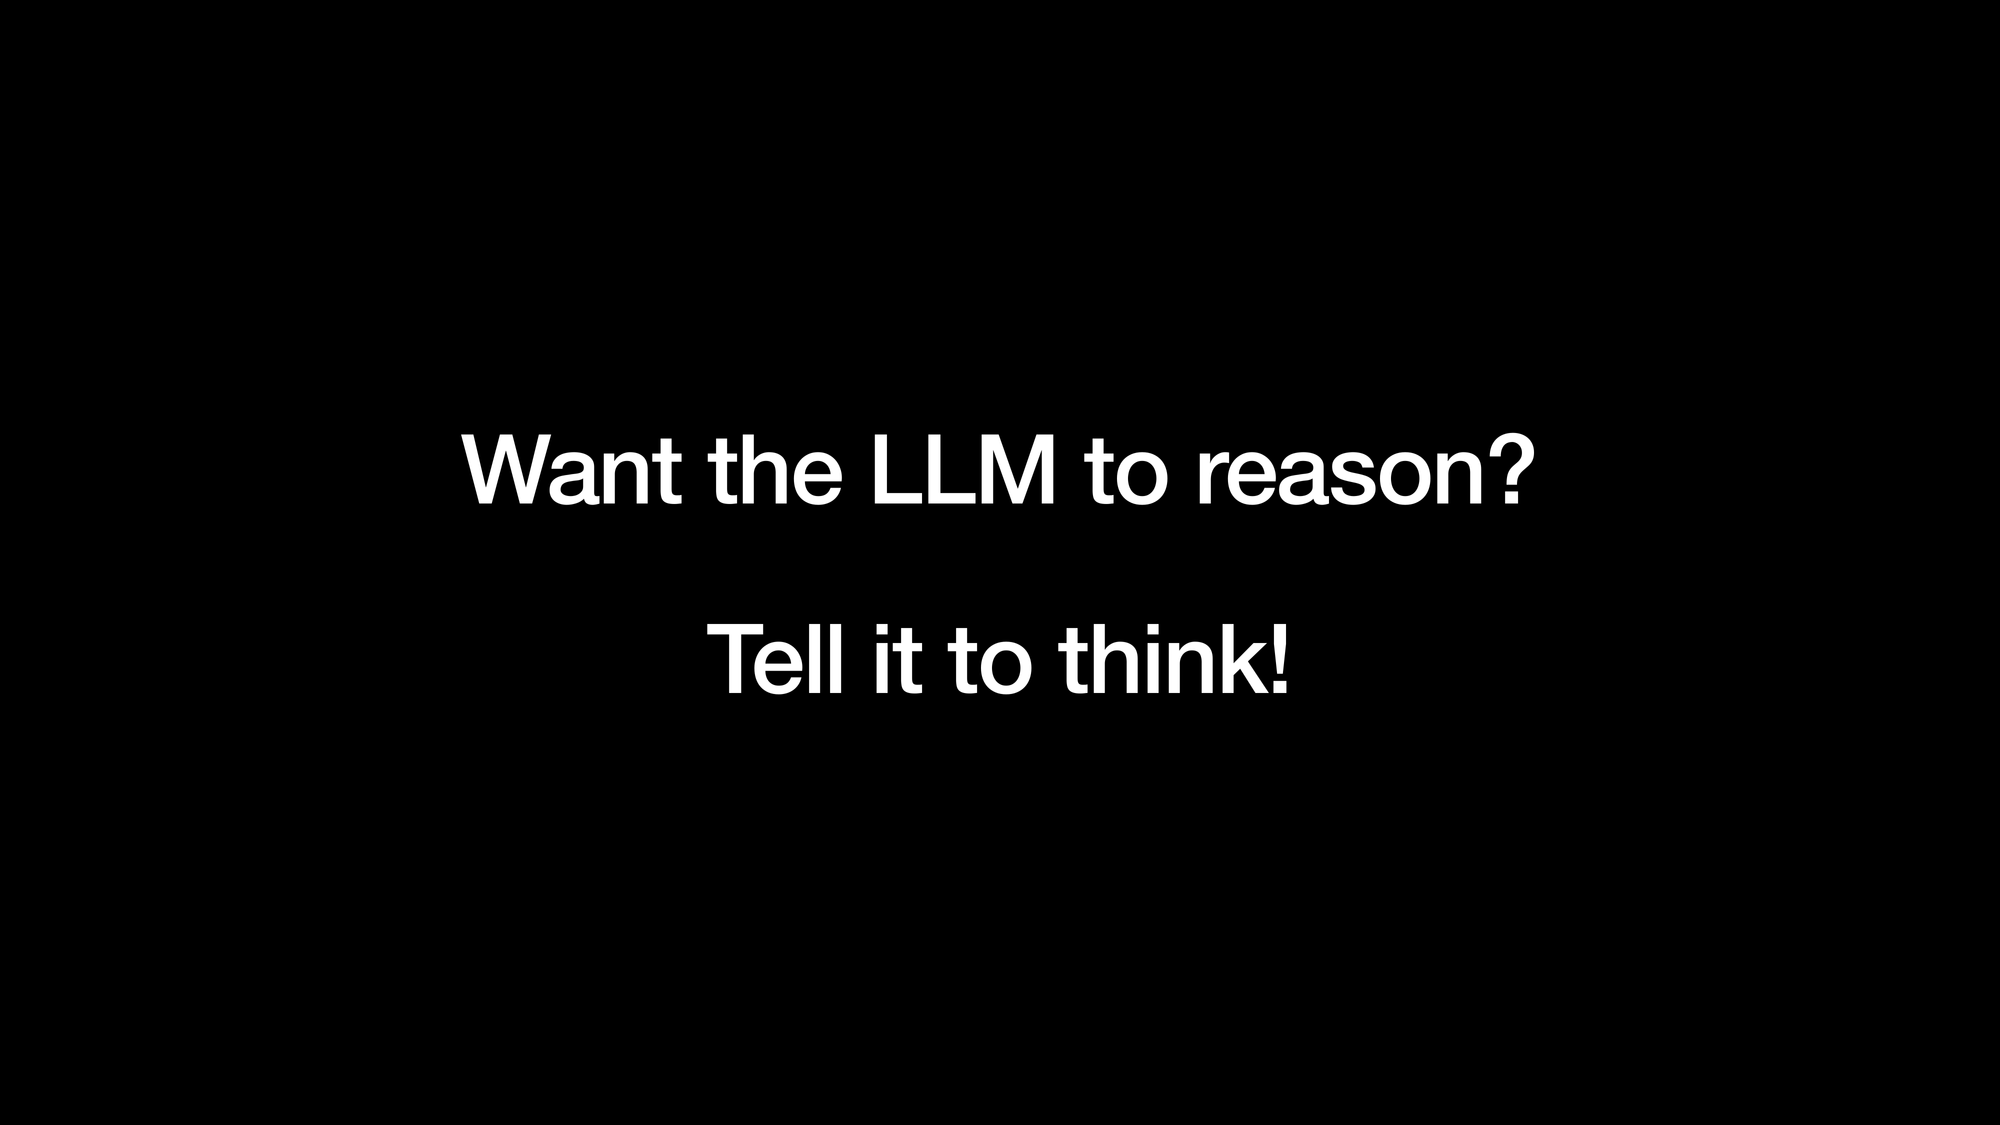 Want the LLM to reason? Tell it to think!